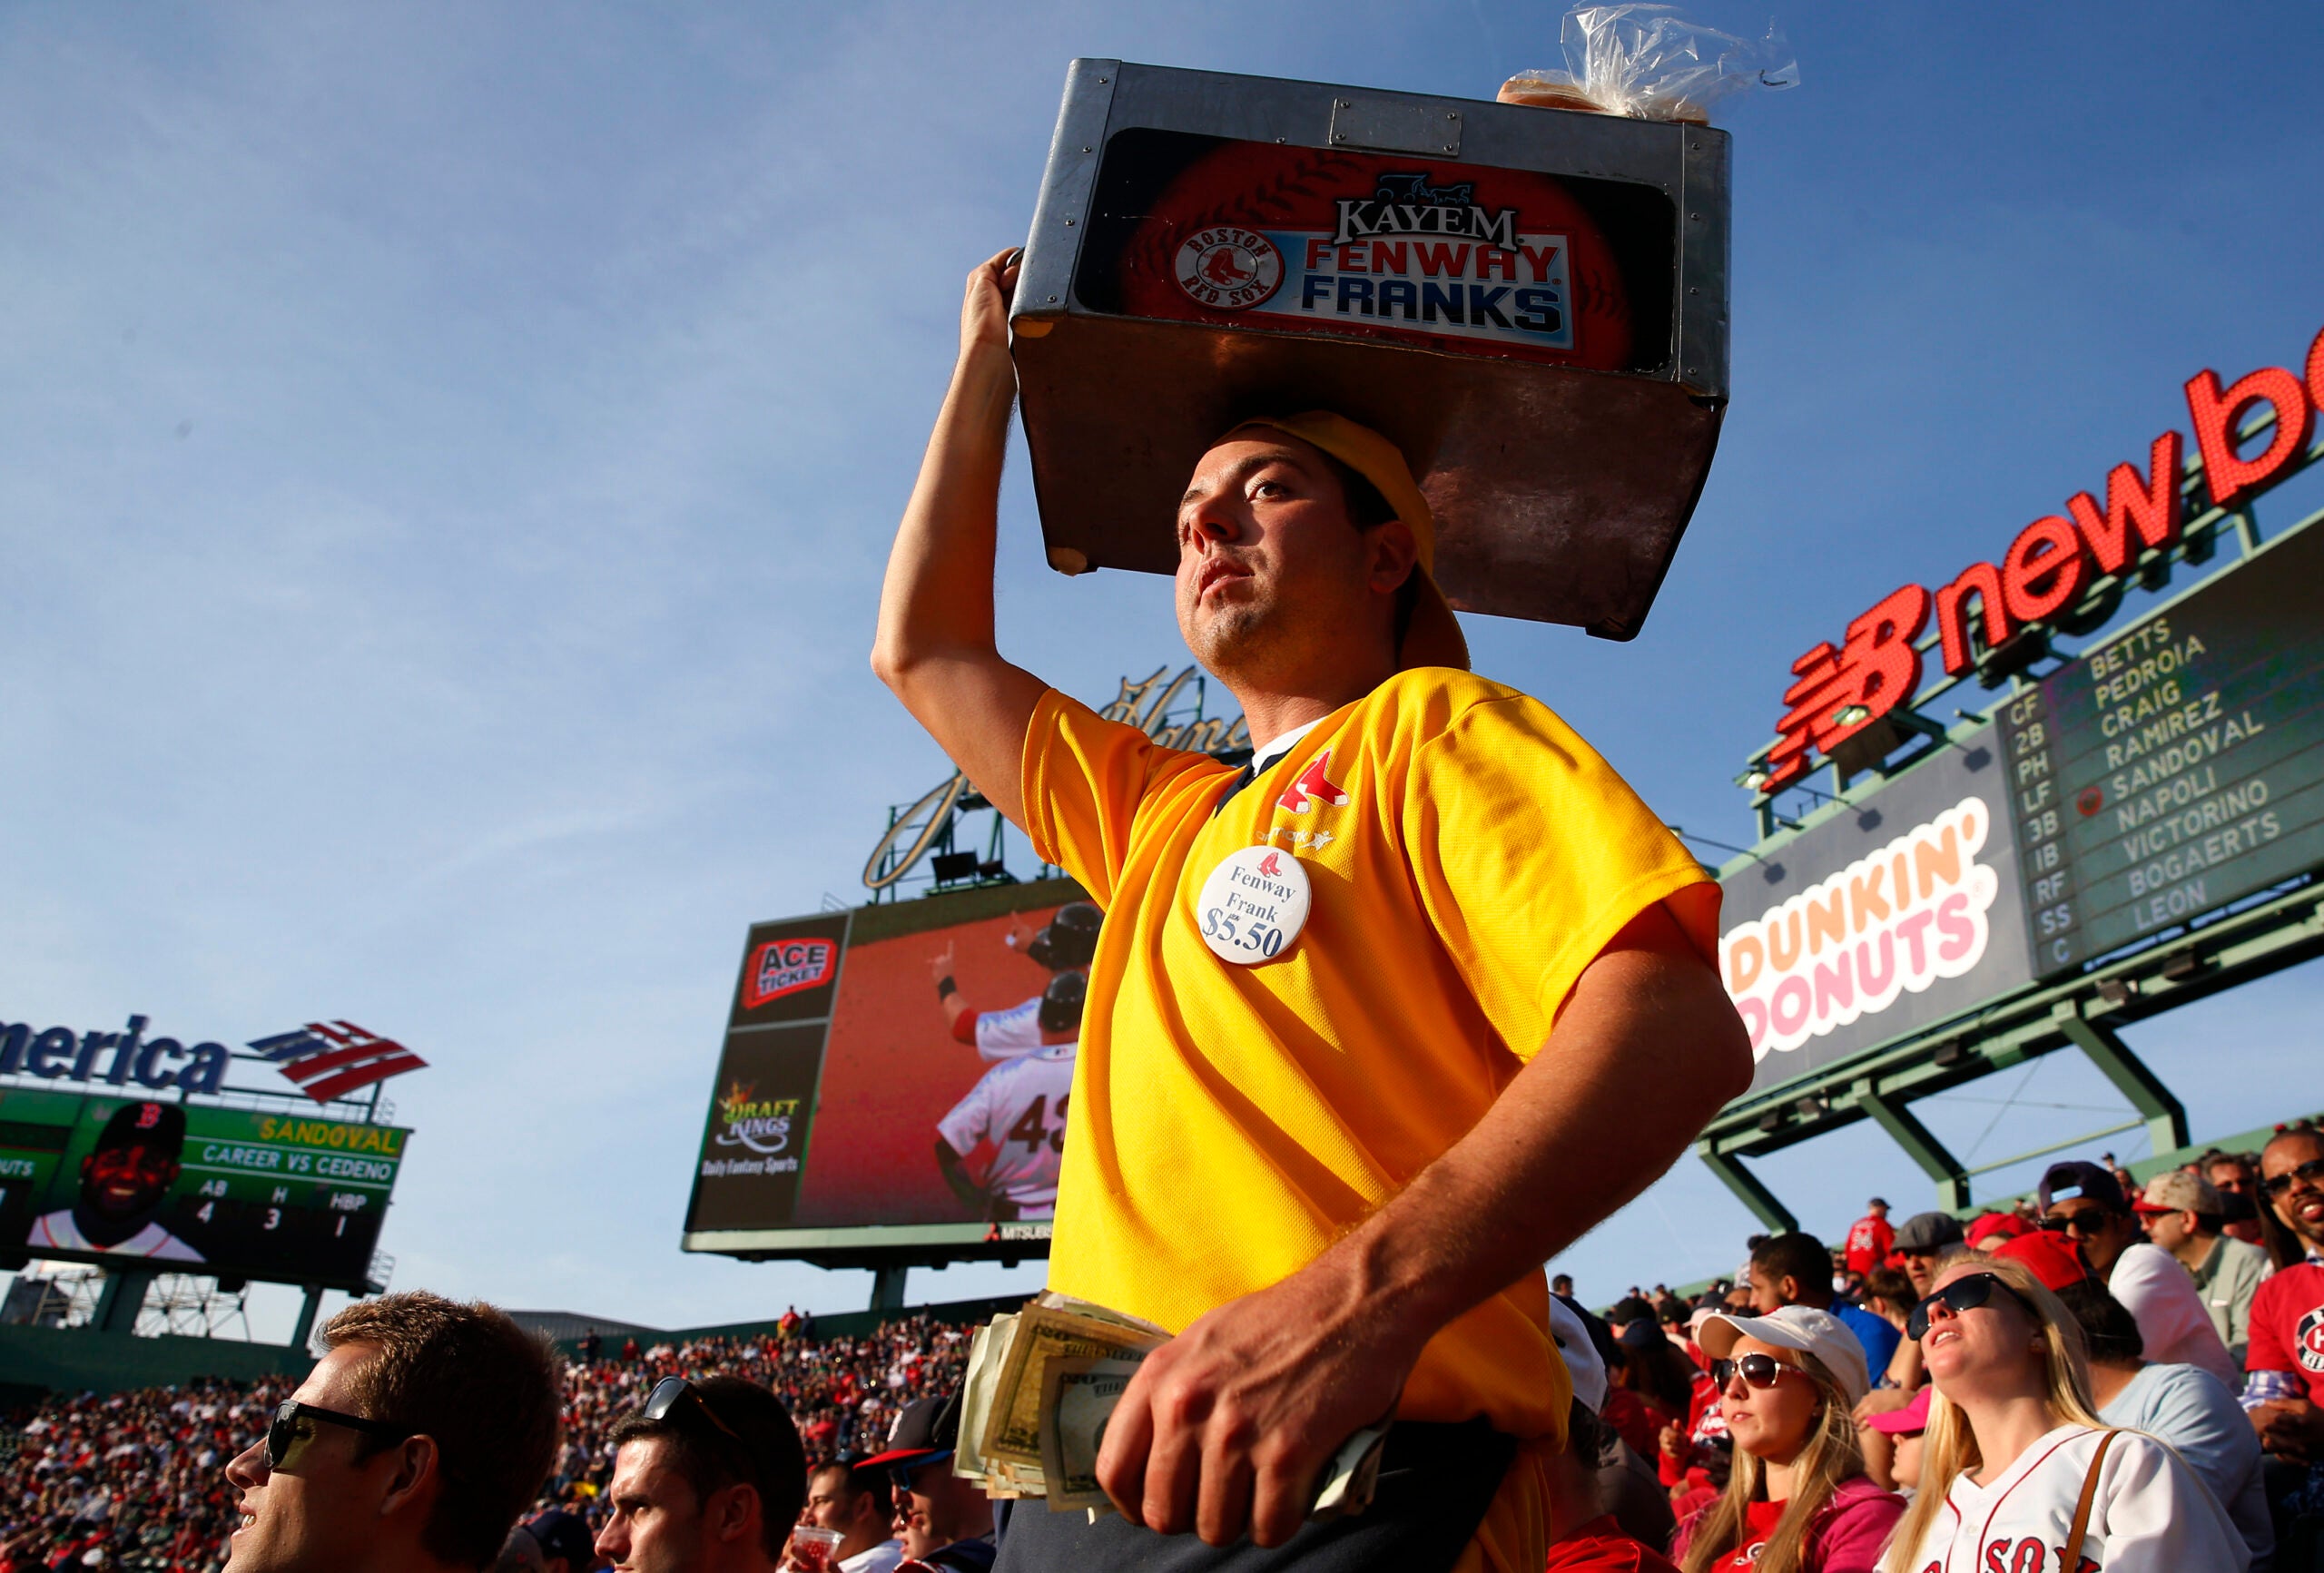 Hot dog economics: How and why Fenway Park vendors pick where to sell food